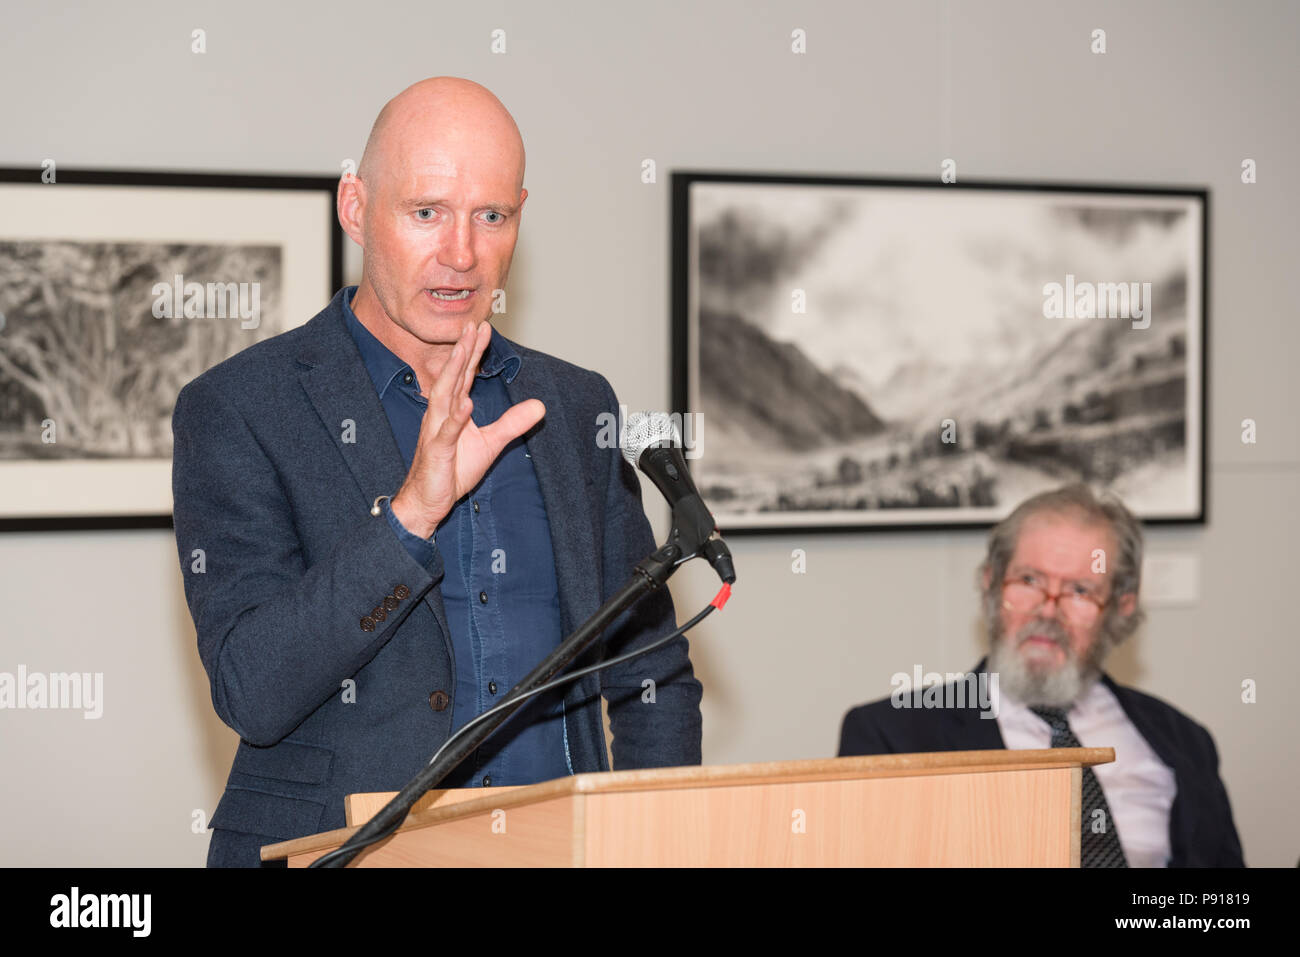 Oriel Môn, Llangefni, Gwynedd, Wales, UK. Friday 13 July 2018. The Opening night and prize awards for the centenary and fourth Kyffin Williams Drawing Prize exhibition, sponsored by ITV Cymru Wales and Rogers Jones auctioneers, was held at Oriel Môn, with Phil Henfrey Head of News ITV Cymru (L) speaking about his memories of Kyffin Williams, whilst David Meredith (R) listens intently. Credit: Michael Gibson/Alamy Live News Stock Photo